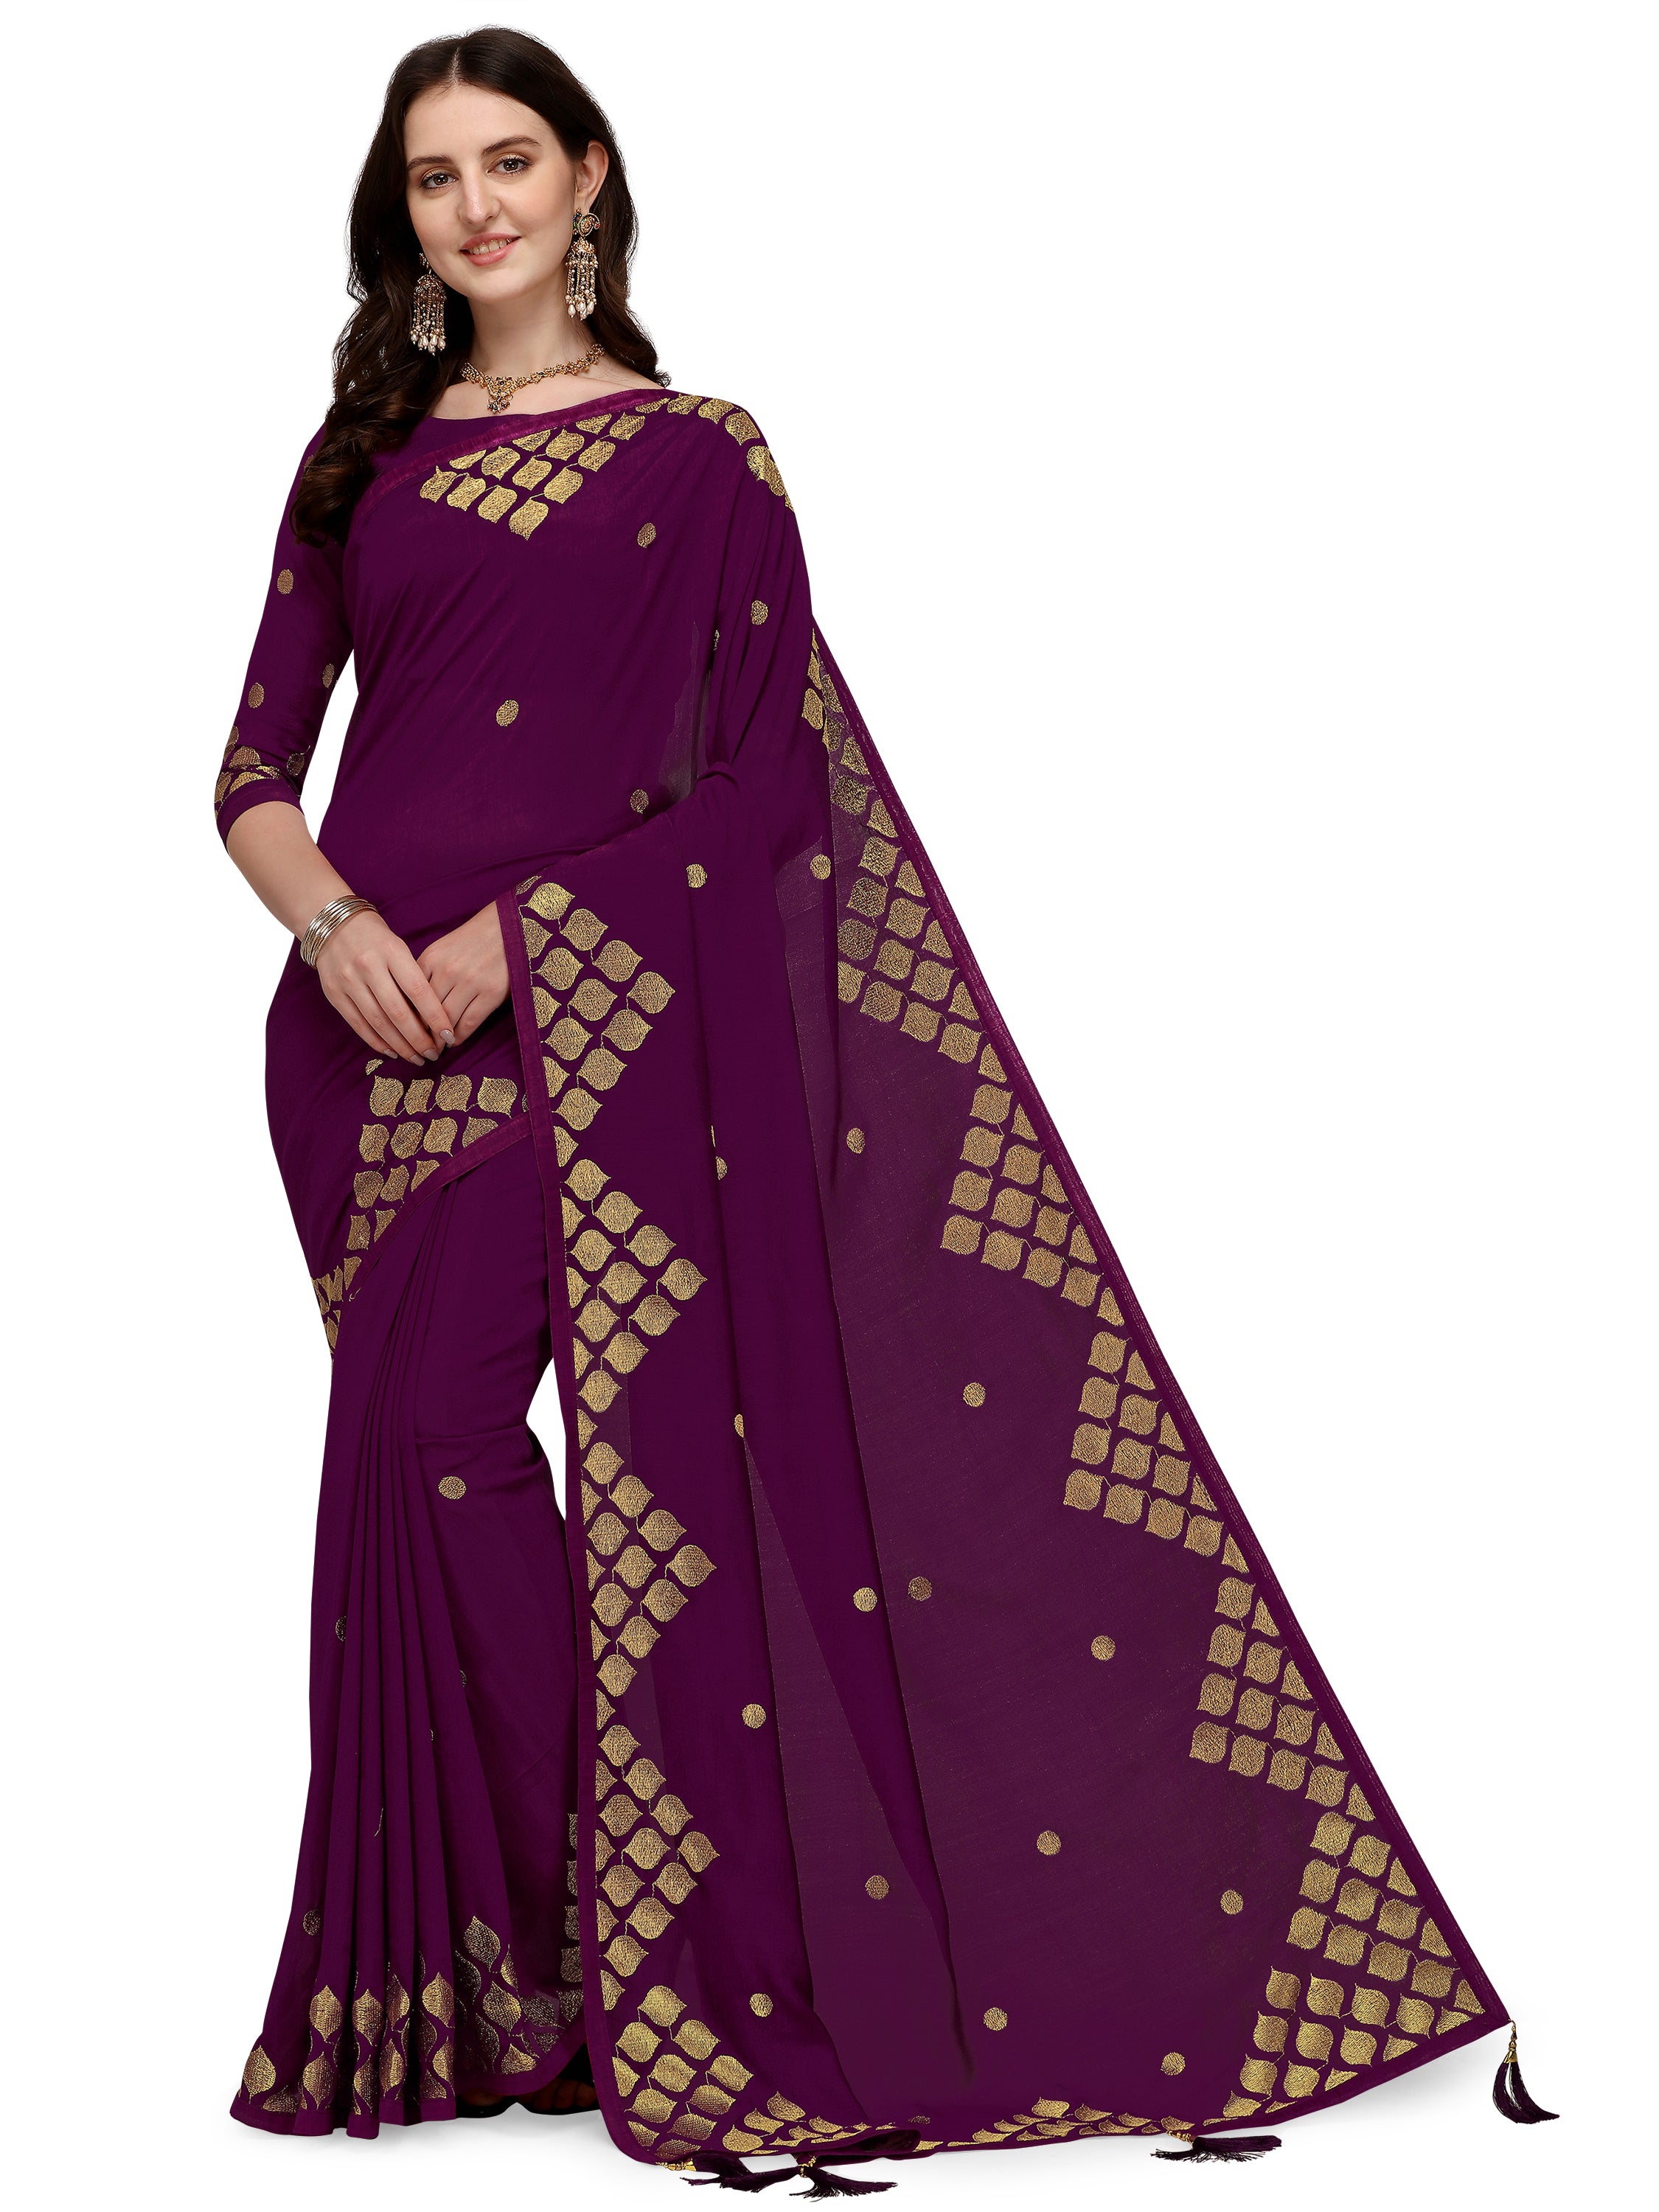 Women's Zari Embroided Paty Wear Traditional Silk Blend Saree With Blouse Piece (Purple) - NIMIDHYA